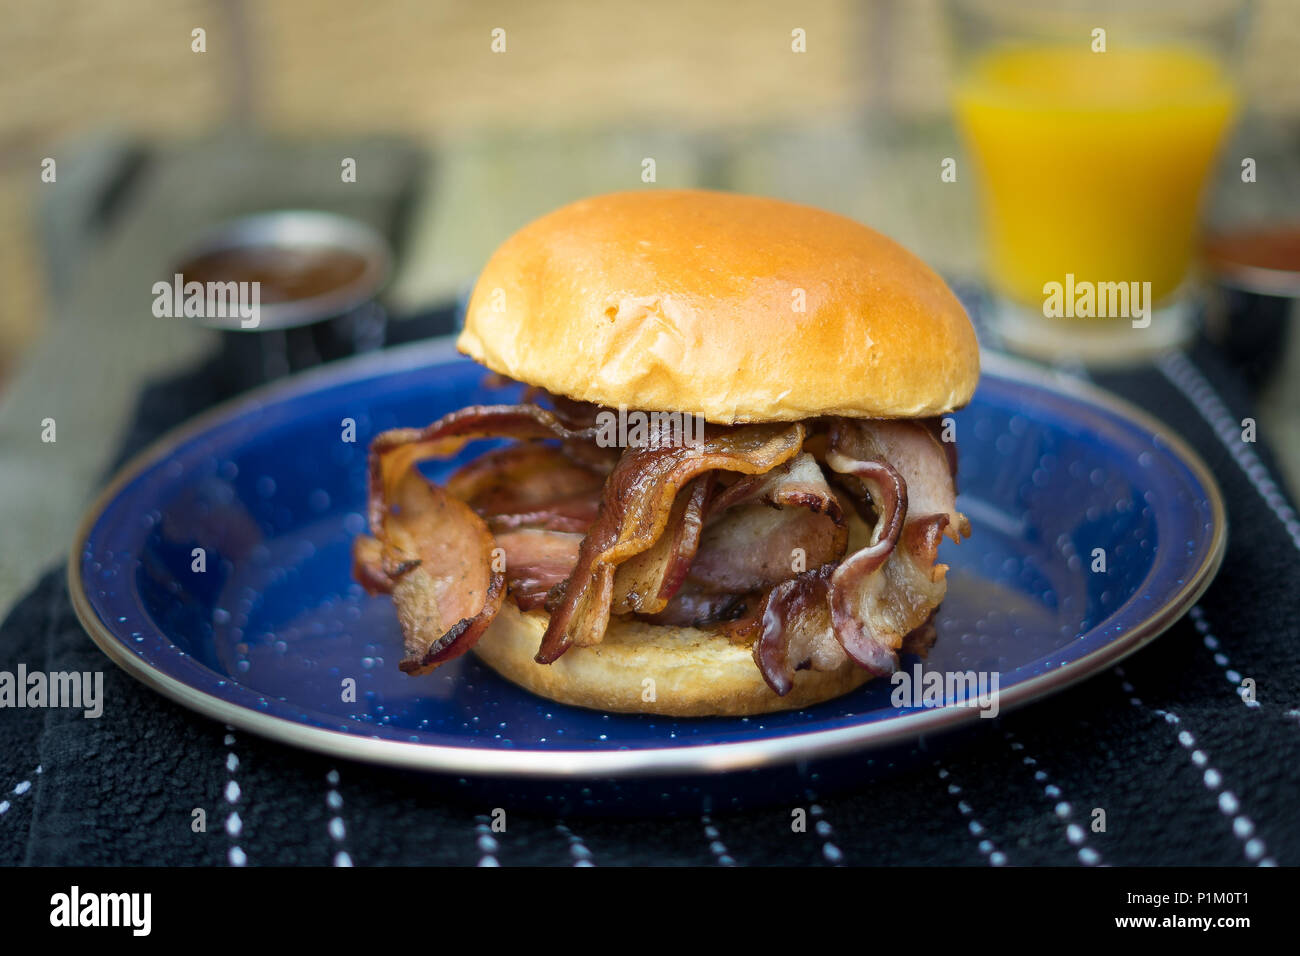 Streaky Bacon in a brioche bun, with ketchup and orange juice in the background. Stock Photo